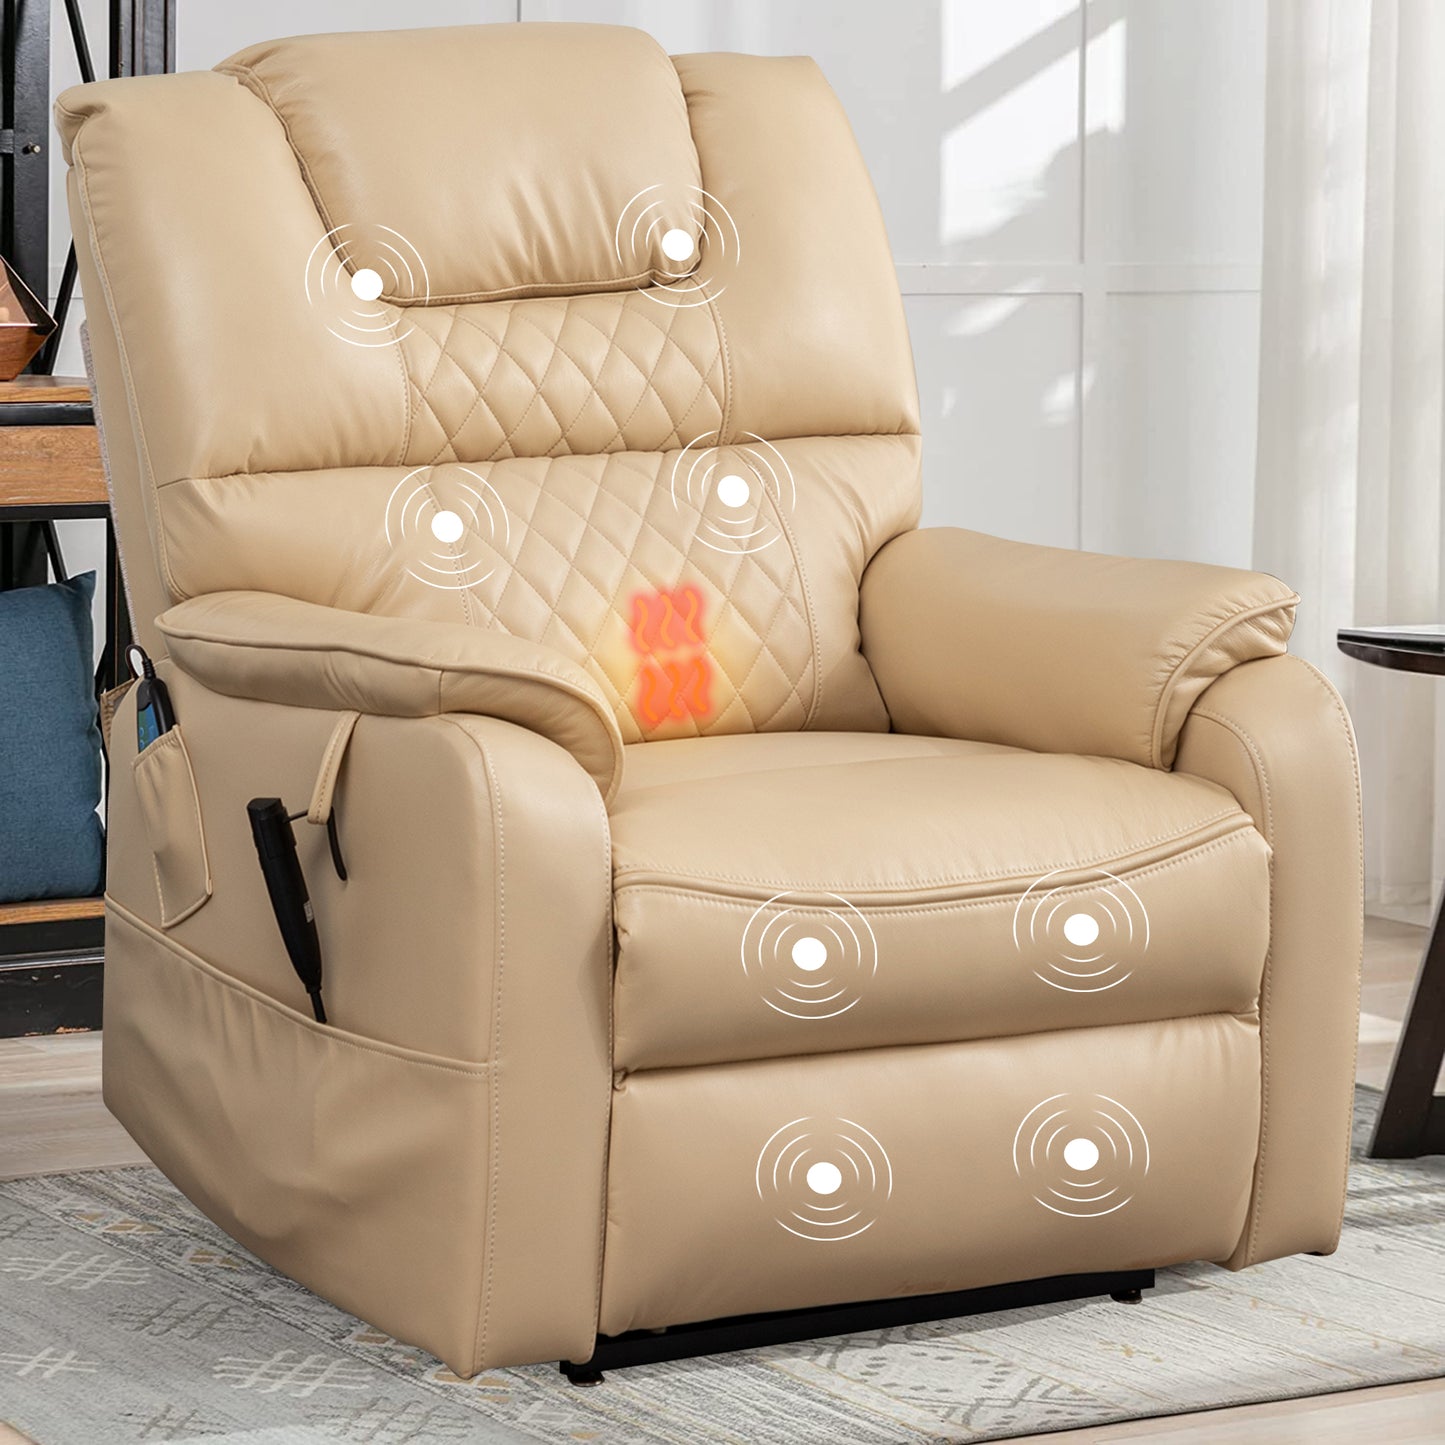 Double Power Recliner Chair Oversized, Electric Recliner Chair with Heat Therapy and Massage, 180 Degrees Lying Flat Recliner for Adults Elderly, Single Leisure Sofa for Living Room, Beige Yellow